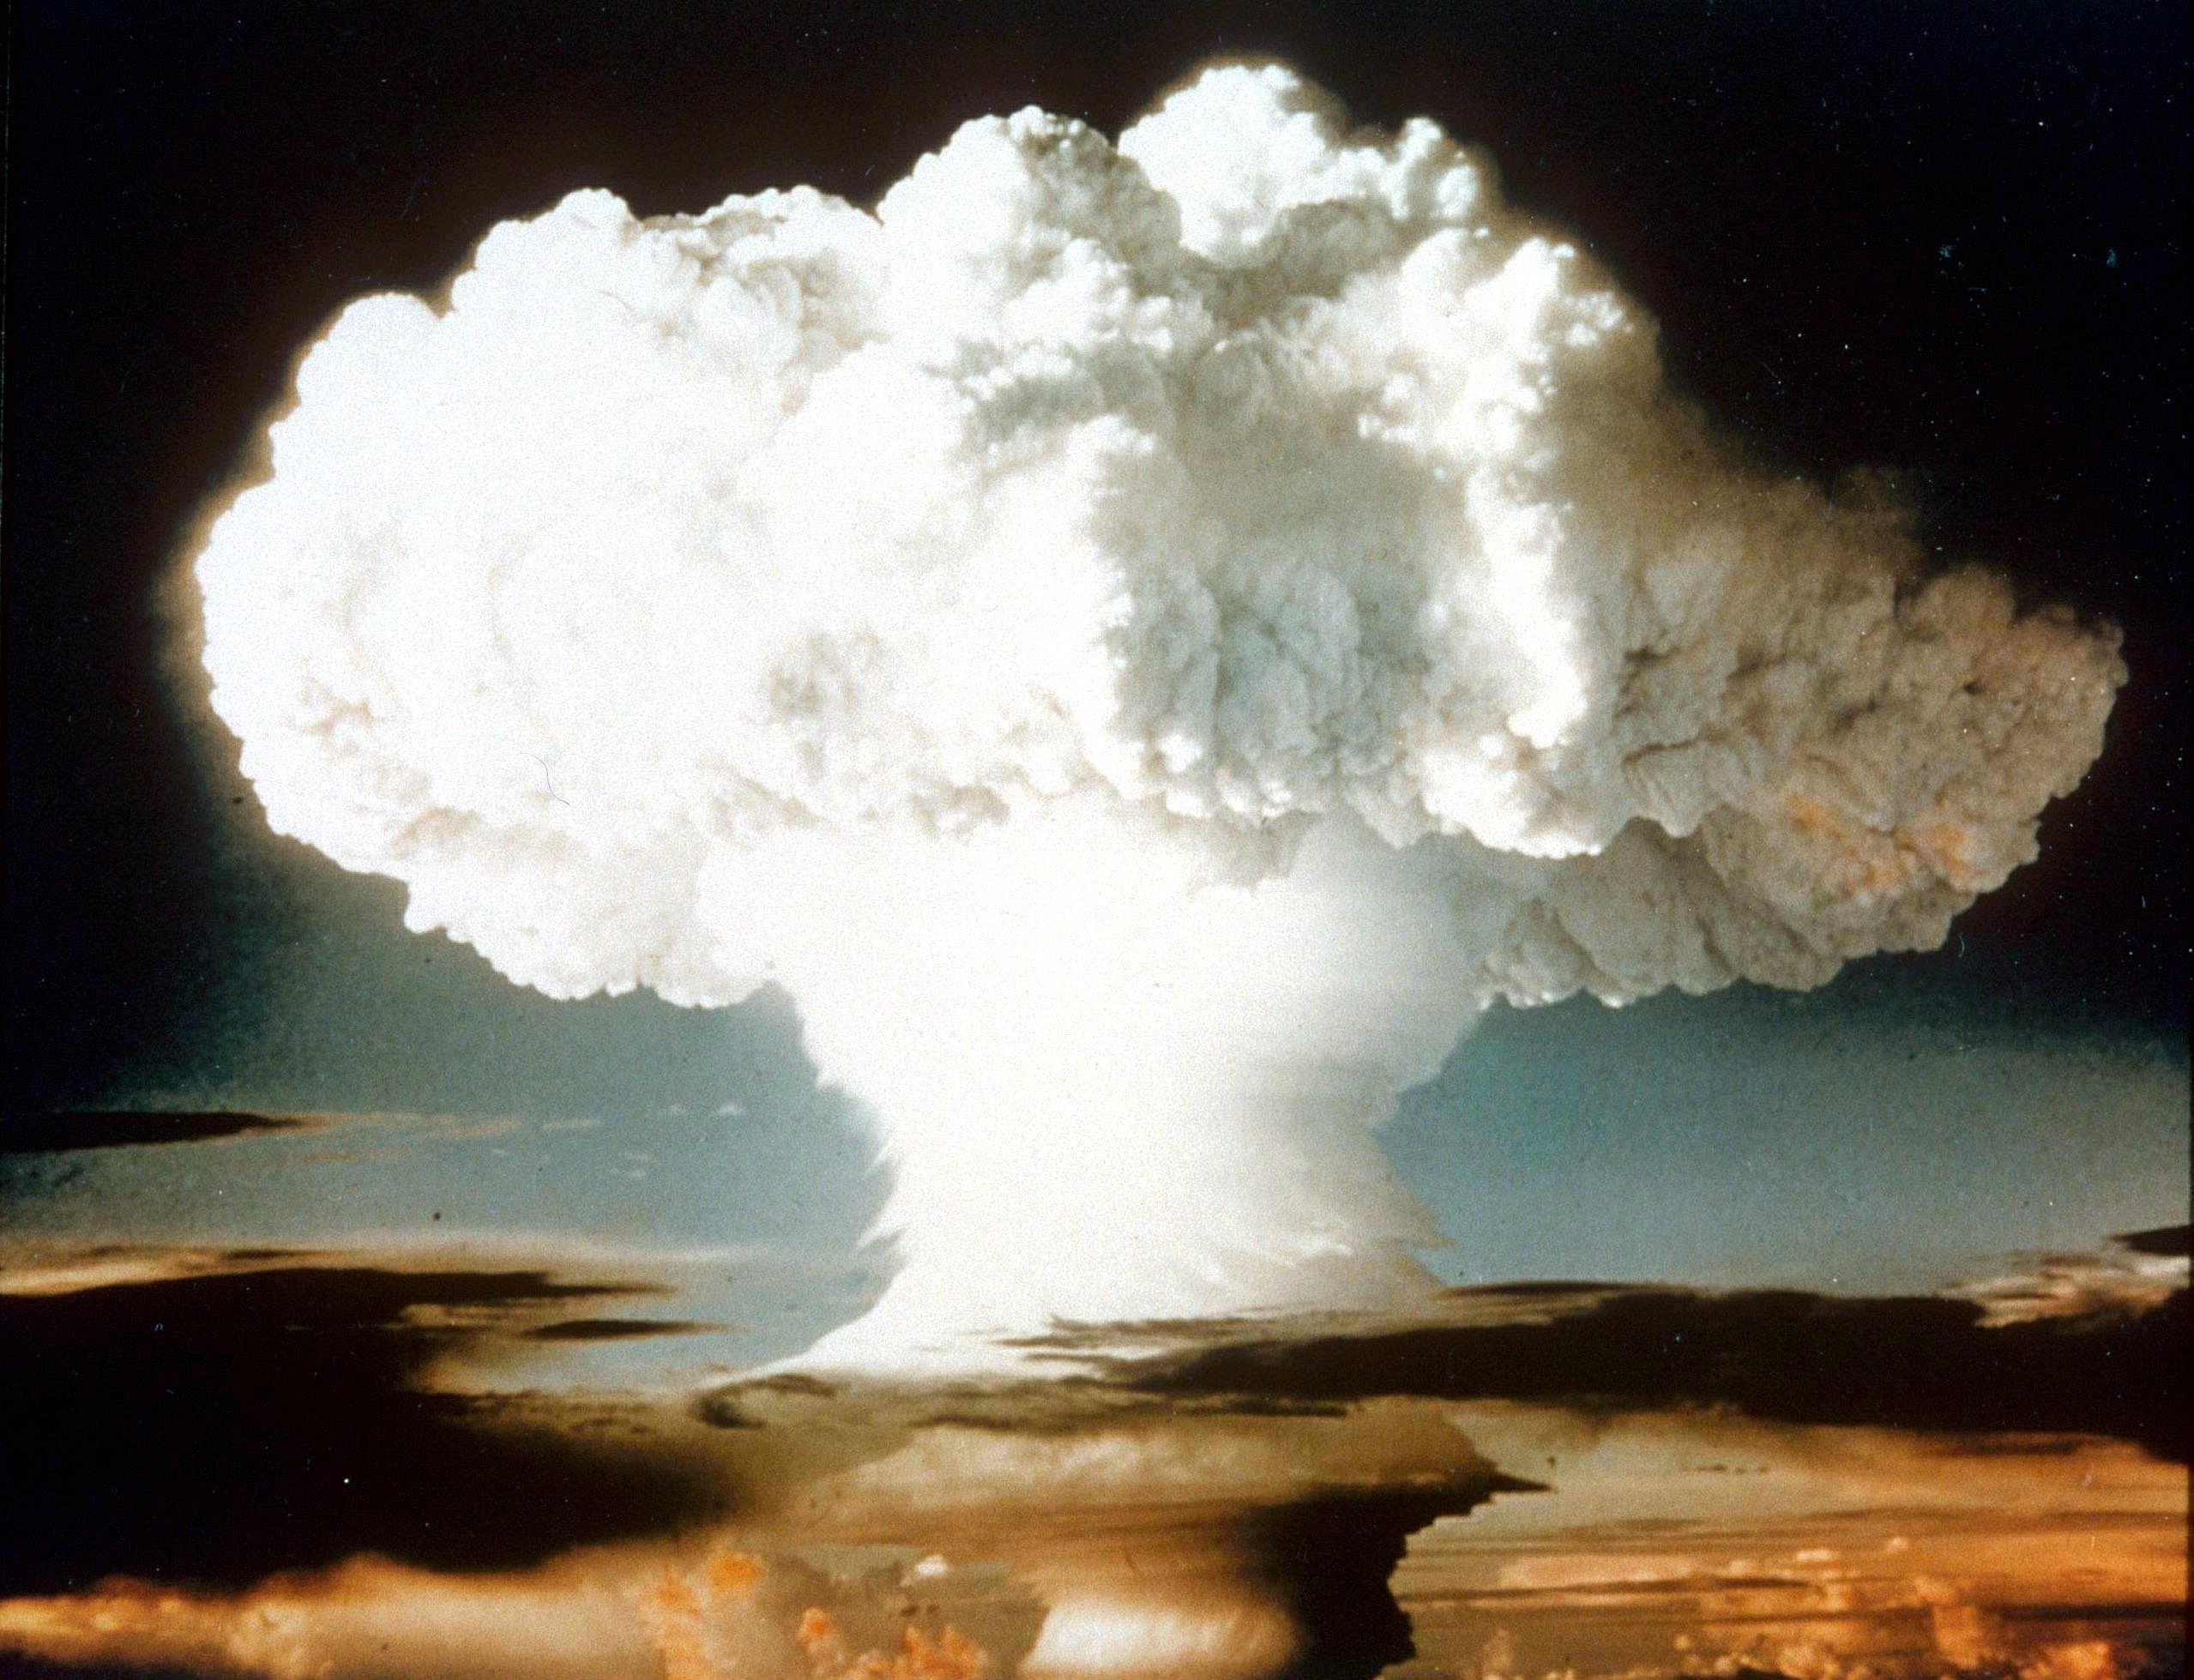 Study confirms that, yes, a nuclear war between the US and Russia would